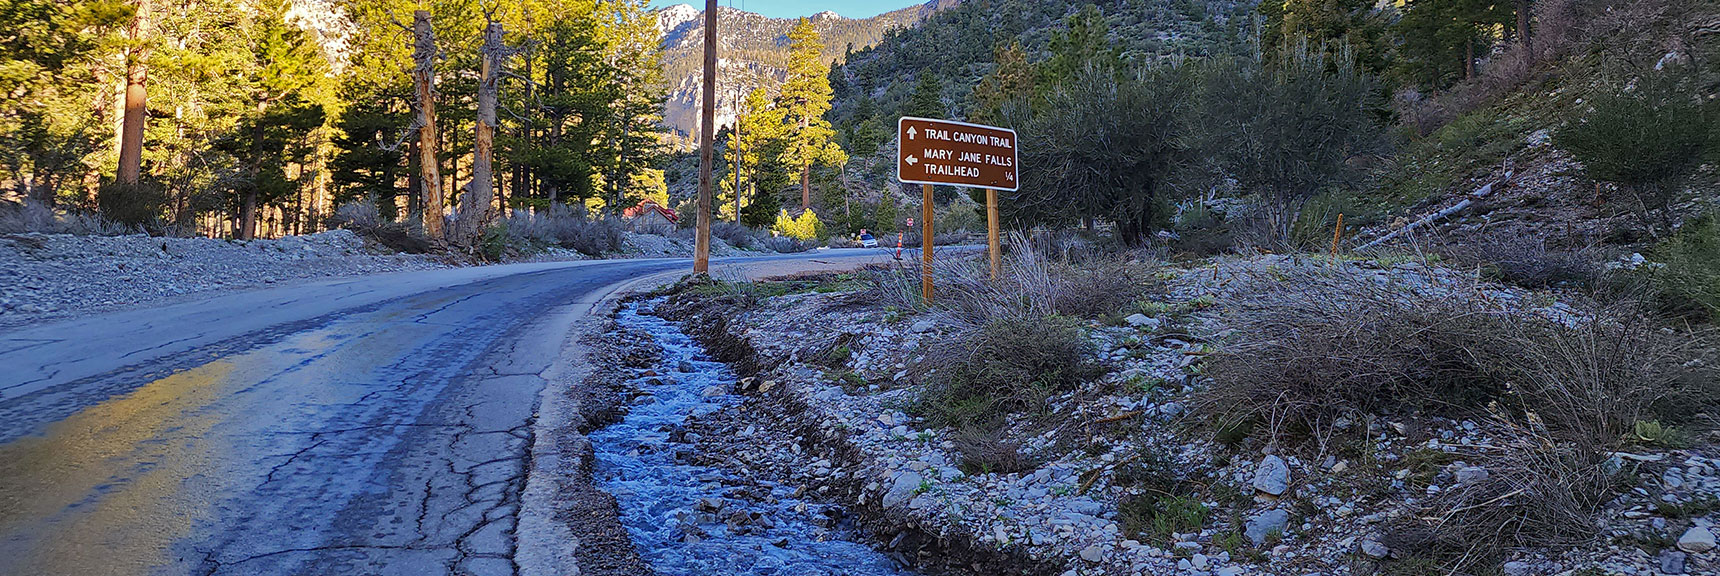 Approaching the Trailhead, Spring Runoff is Already Visible | Mary Jane Falls | Mt. Charleston Wilderness | Spring Mountains, Nevada